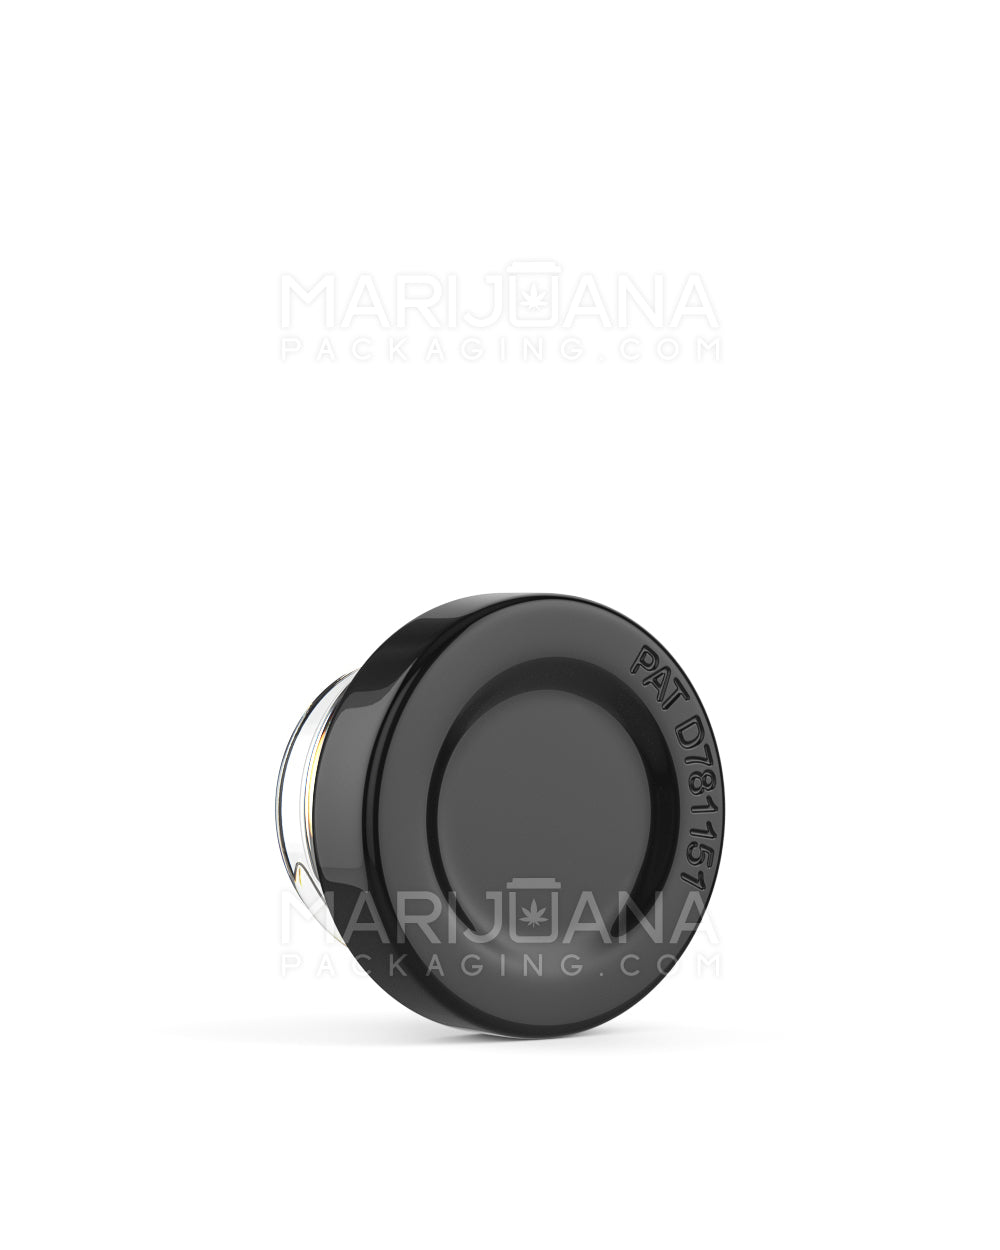 Glossy Black Glass Concentrate Containers w/ Metallized Interior | 28mm - 5mL - 400 Count - 4